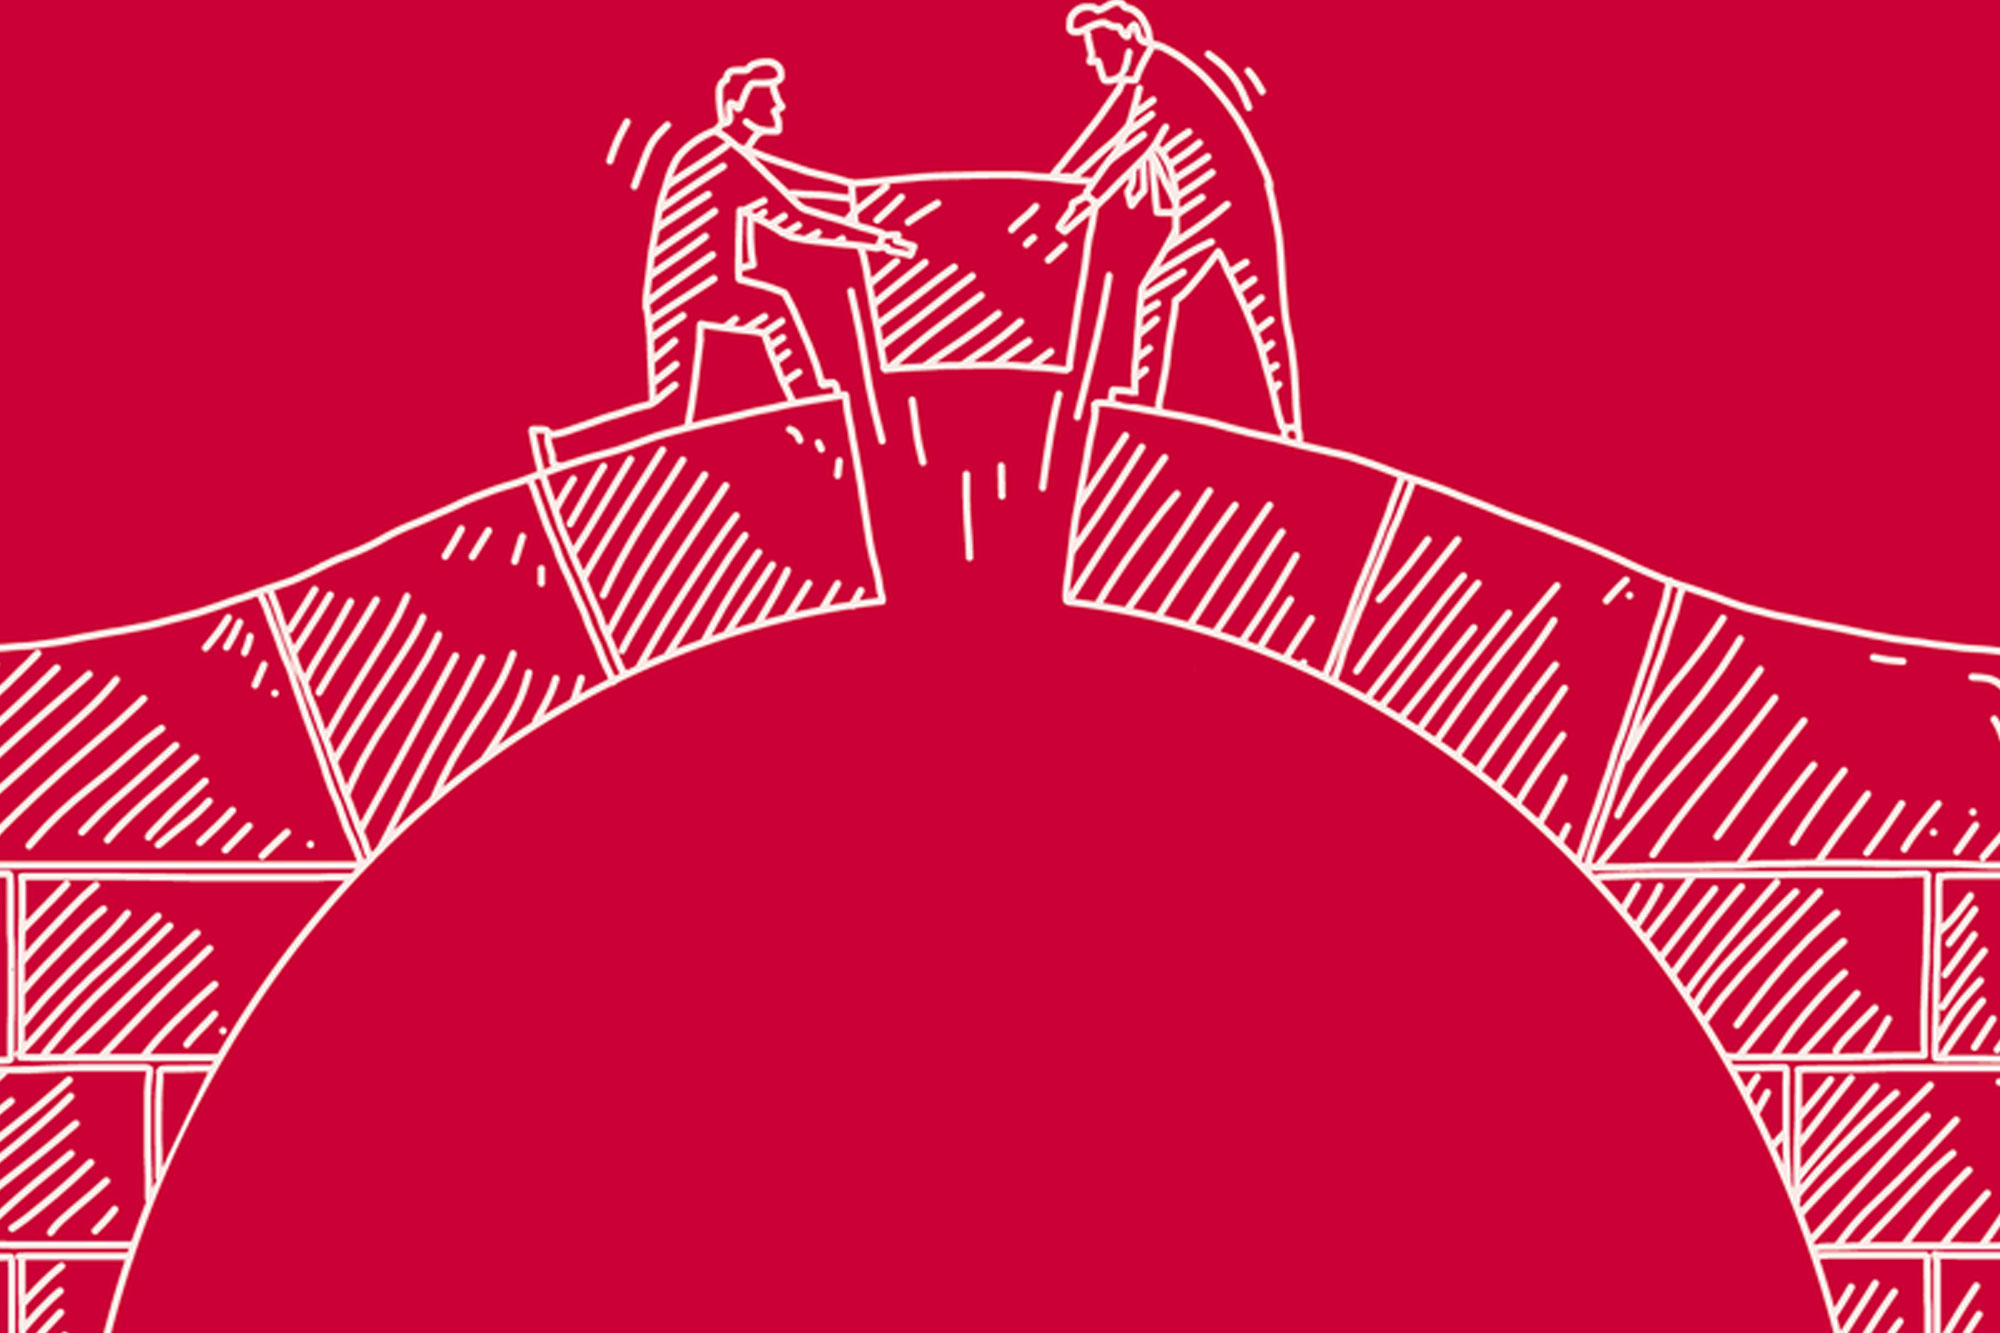 Line drawing of two individuals laying the final stone in a bridge together (detail from volume cover).